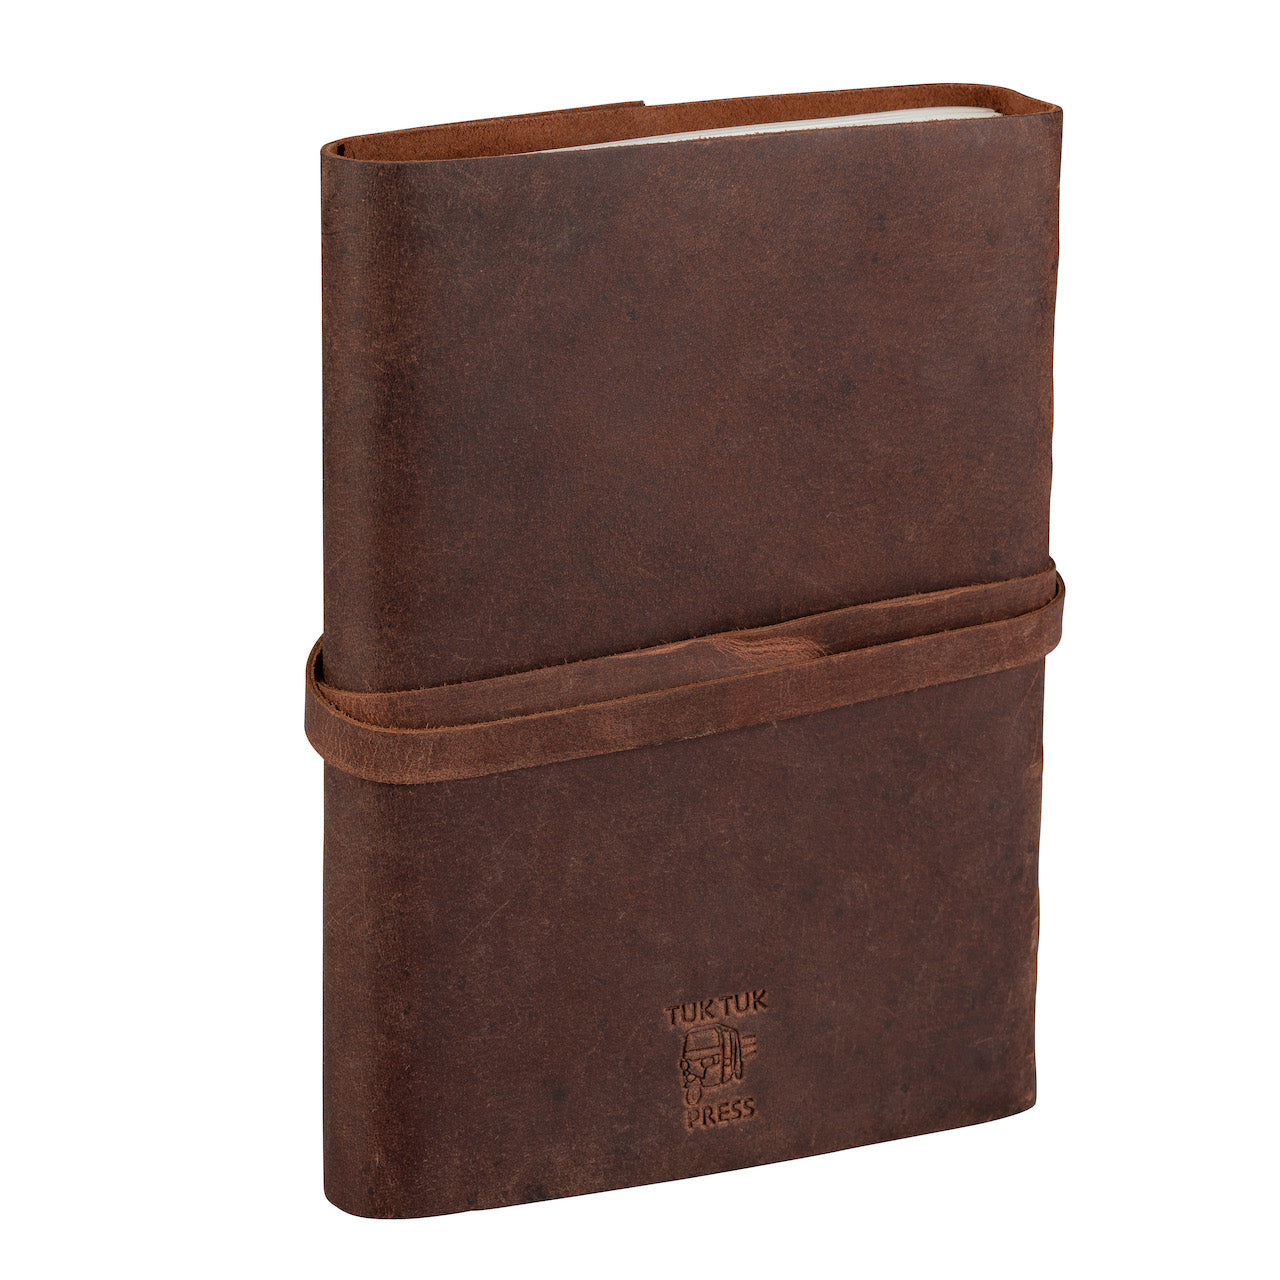 Tuk Tuk Press® Handmade Leather Oil Journal Planner, 200 Thick Unlined Recycled Cotton Pages